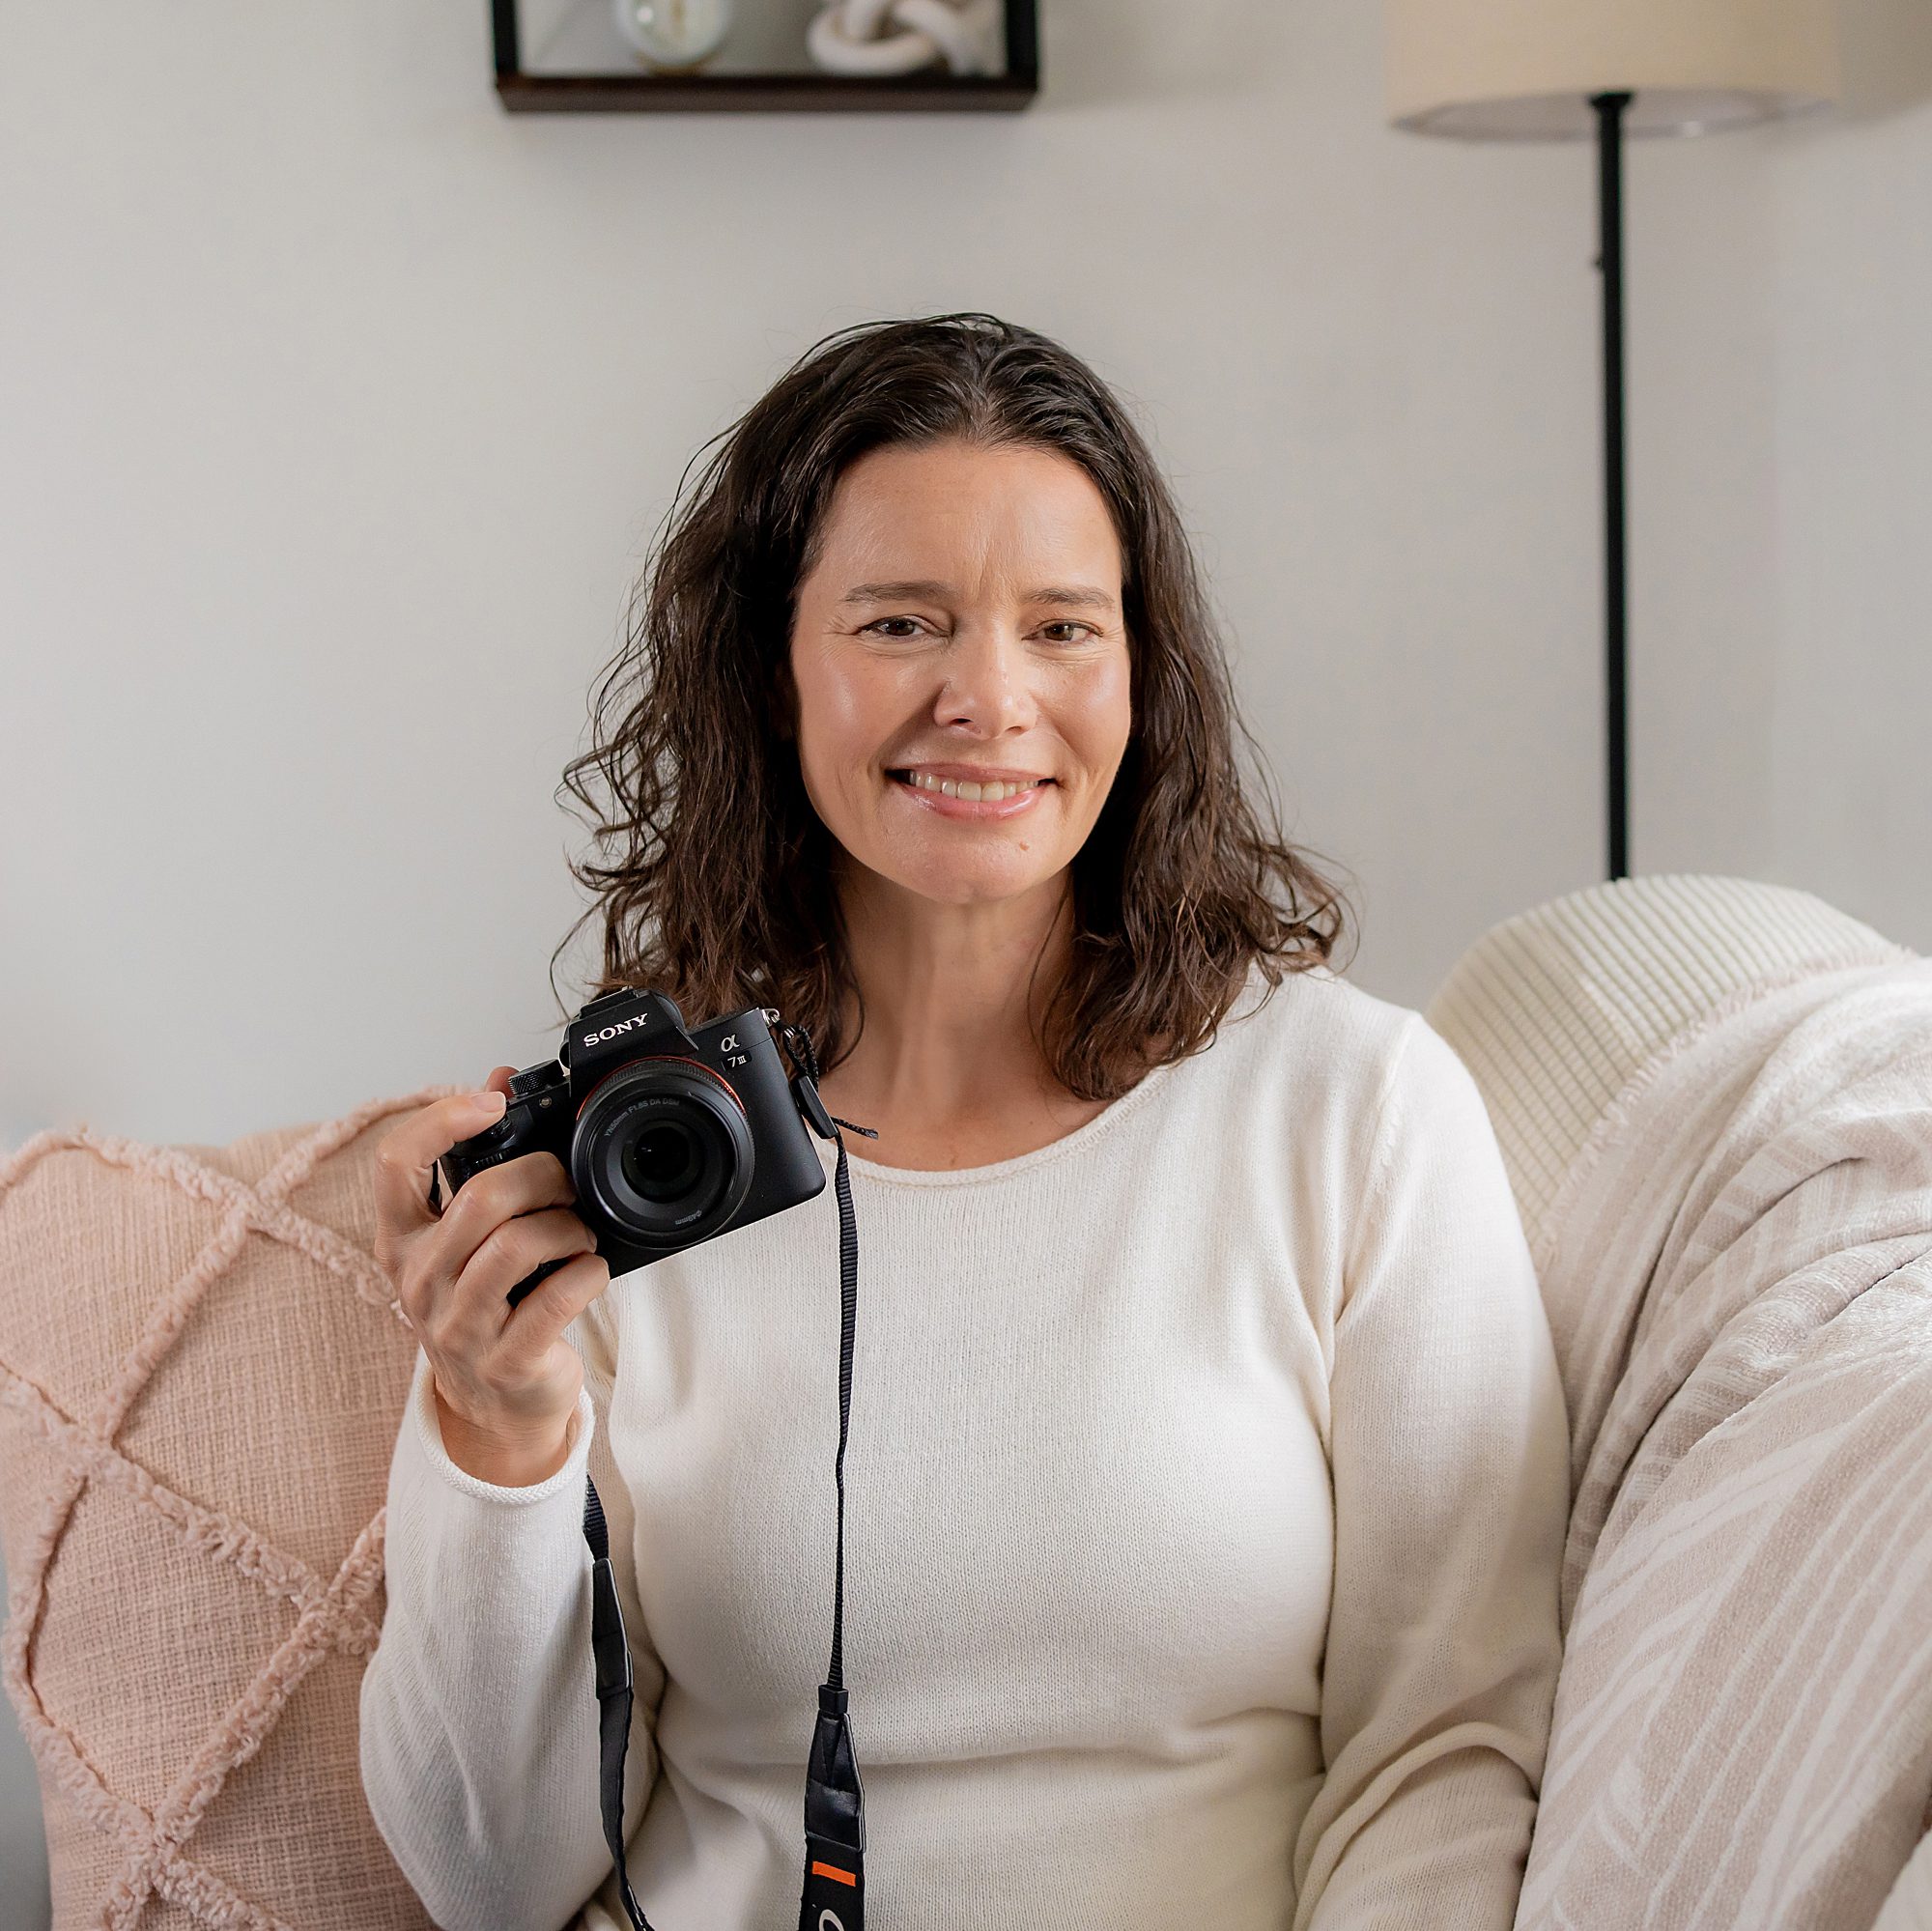 A woman sitting on a couch holding a camera.